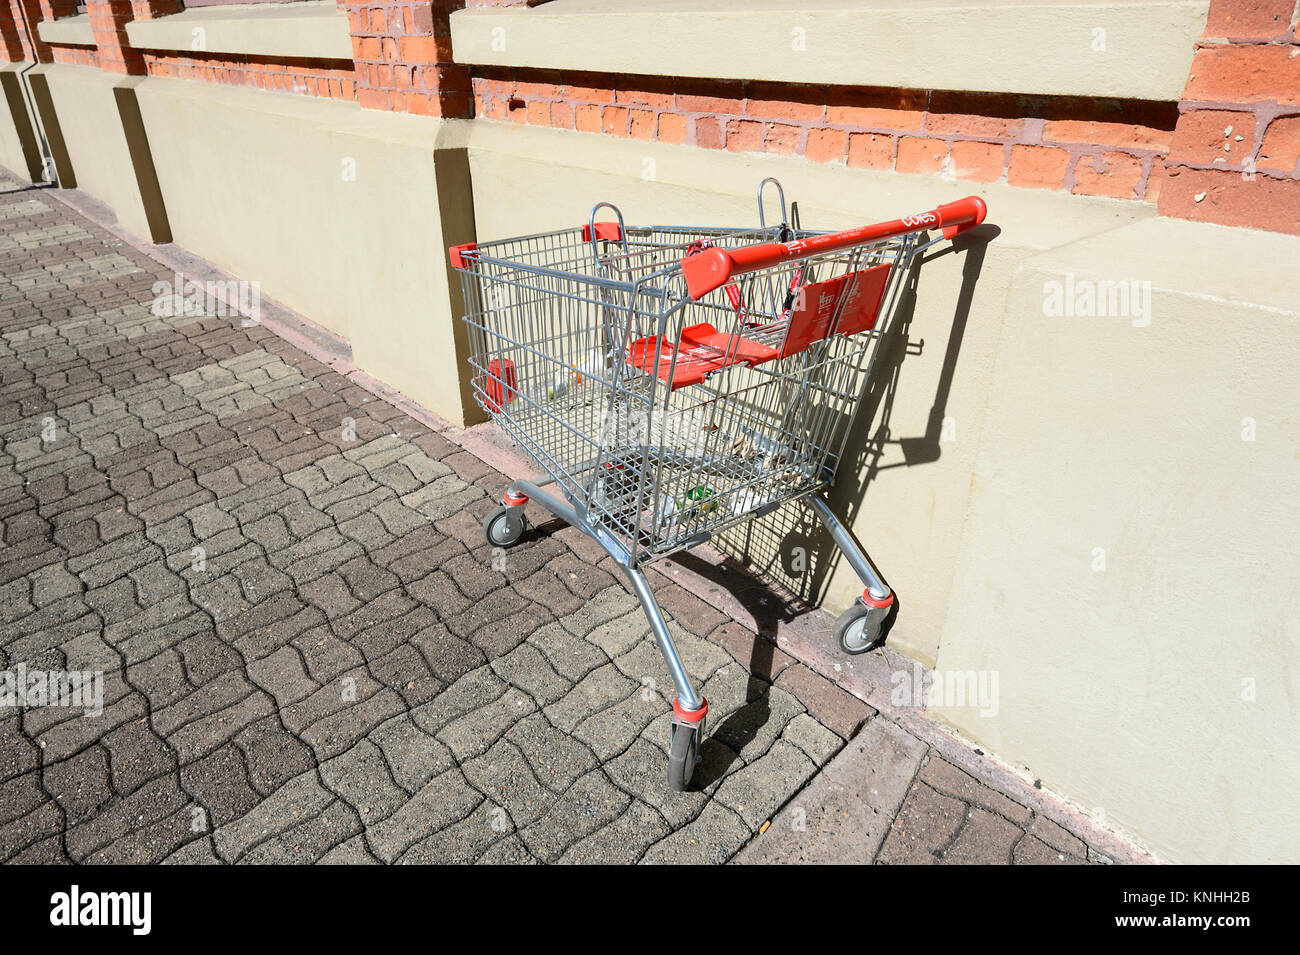 Shopping trolley abandoned in a street, Australia Stock Photo